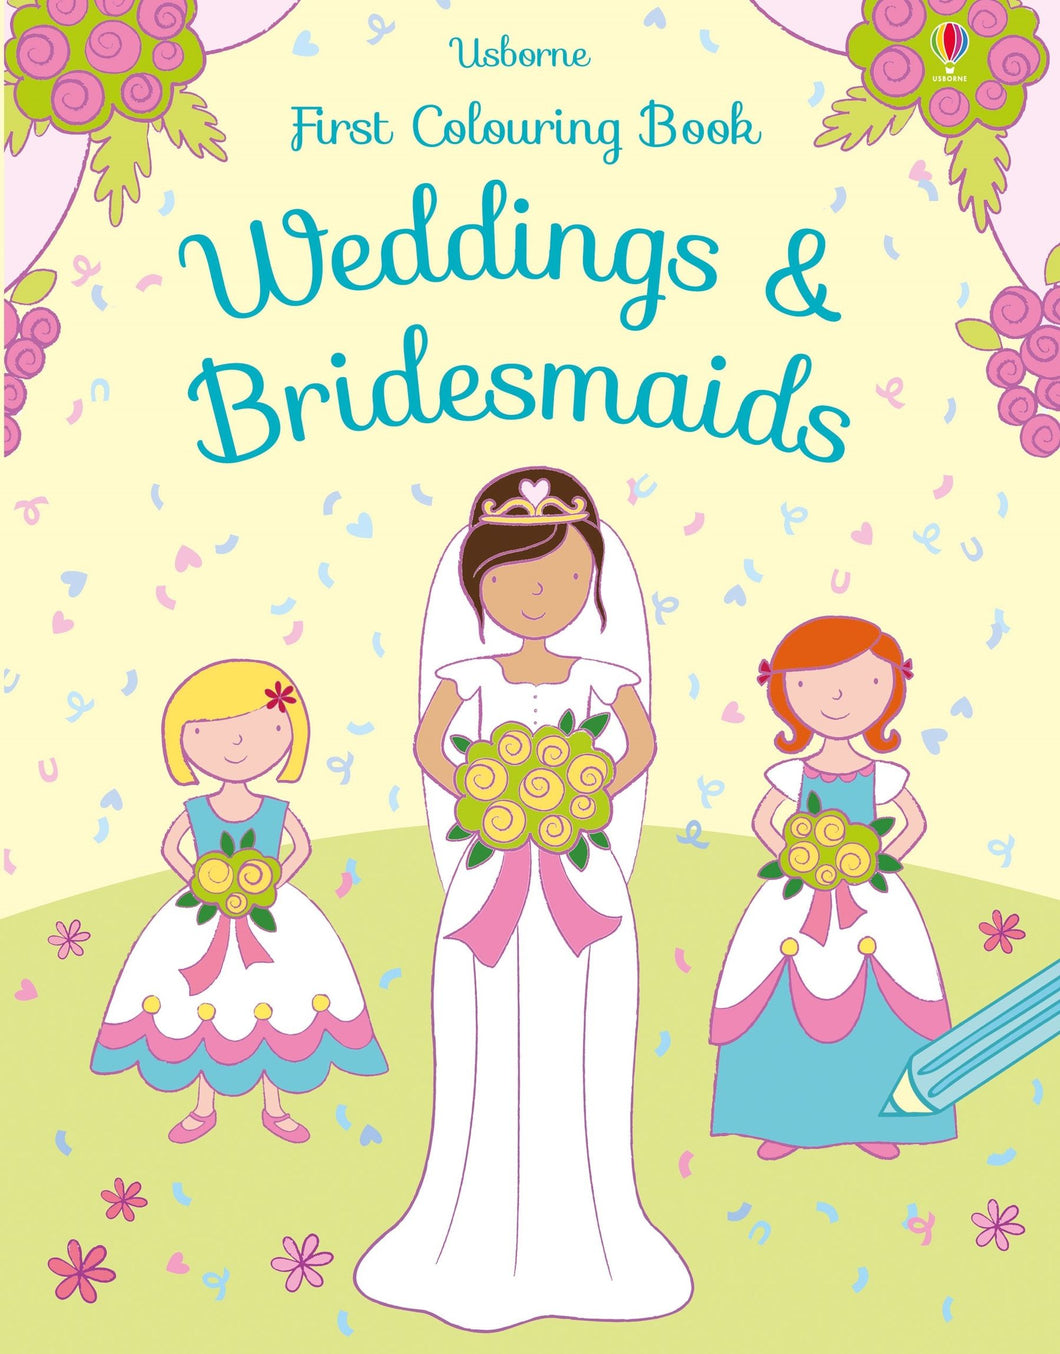 First Colouring Book Weddings and Bridesmaids